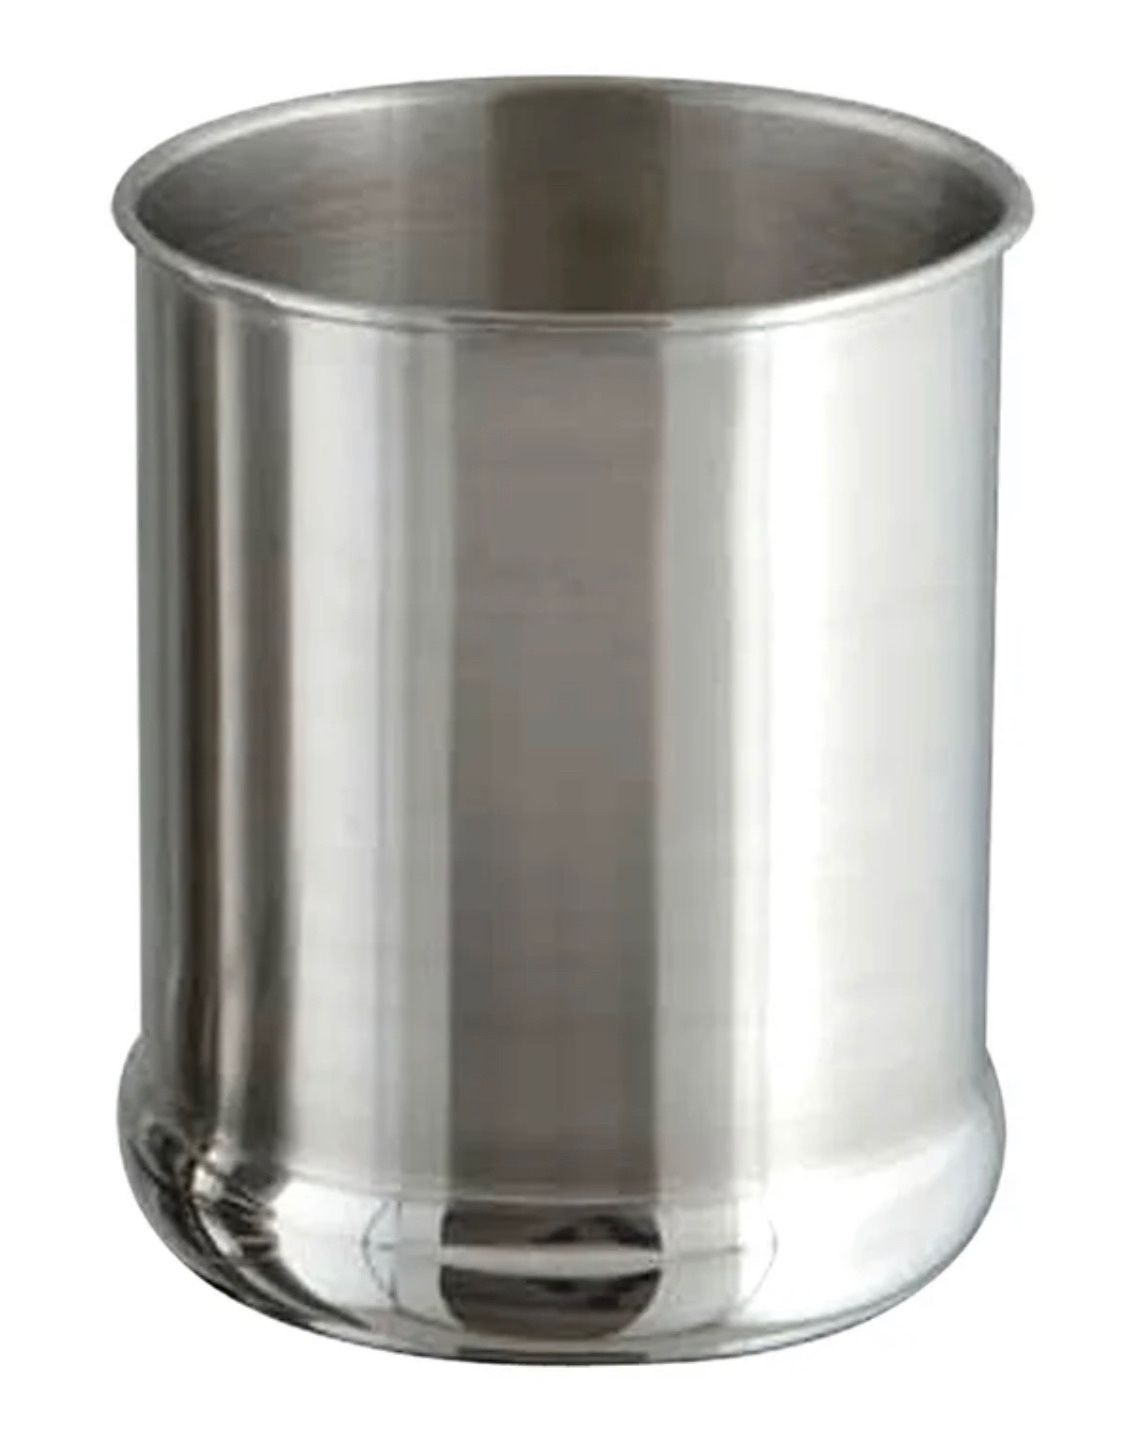 {ONE} Cylinder polished utensil crock - 2 Qts. Material: stainless steel. Overall: 6” H x 5” W x 5” D. MSRP: $23. Our price: $9 + Sales tax 